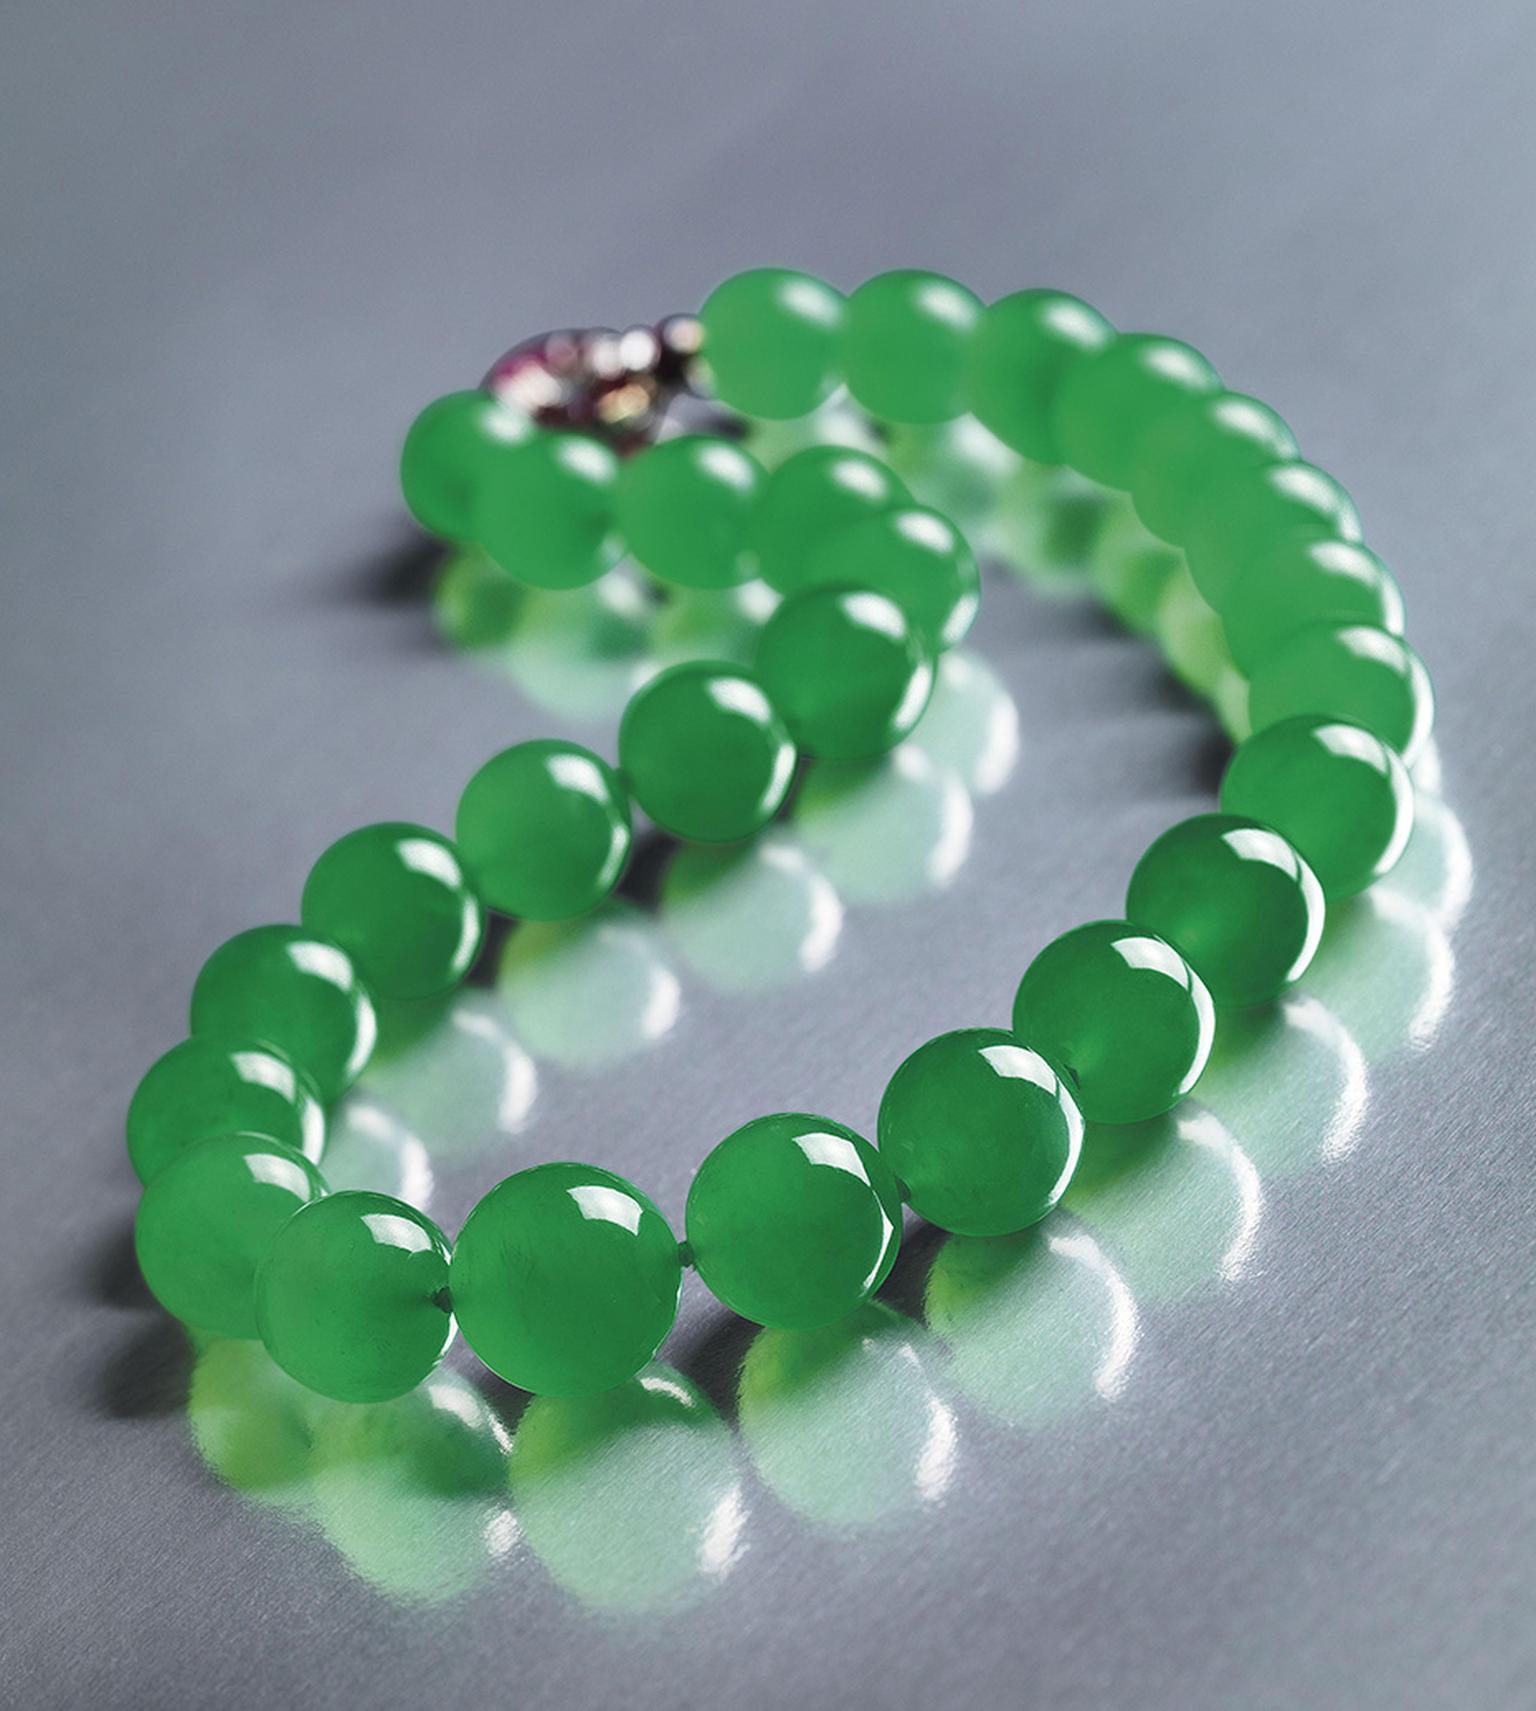 Made up of 27 Qing jadeite beads, The Hutton-Mdivani necklace was formerly the property of socialite and heiress Barbara Hutton